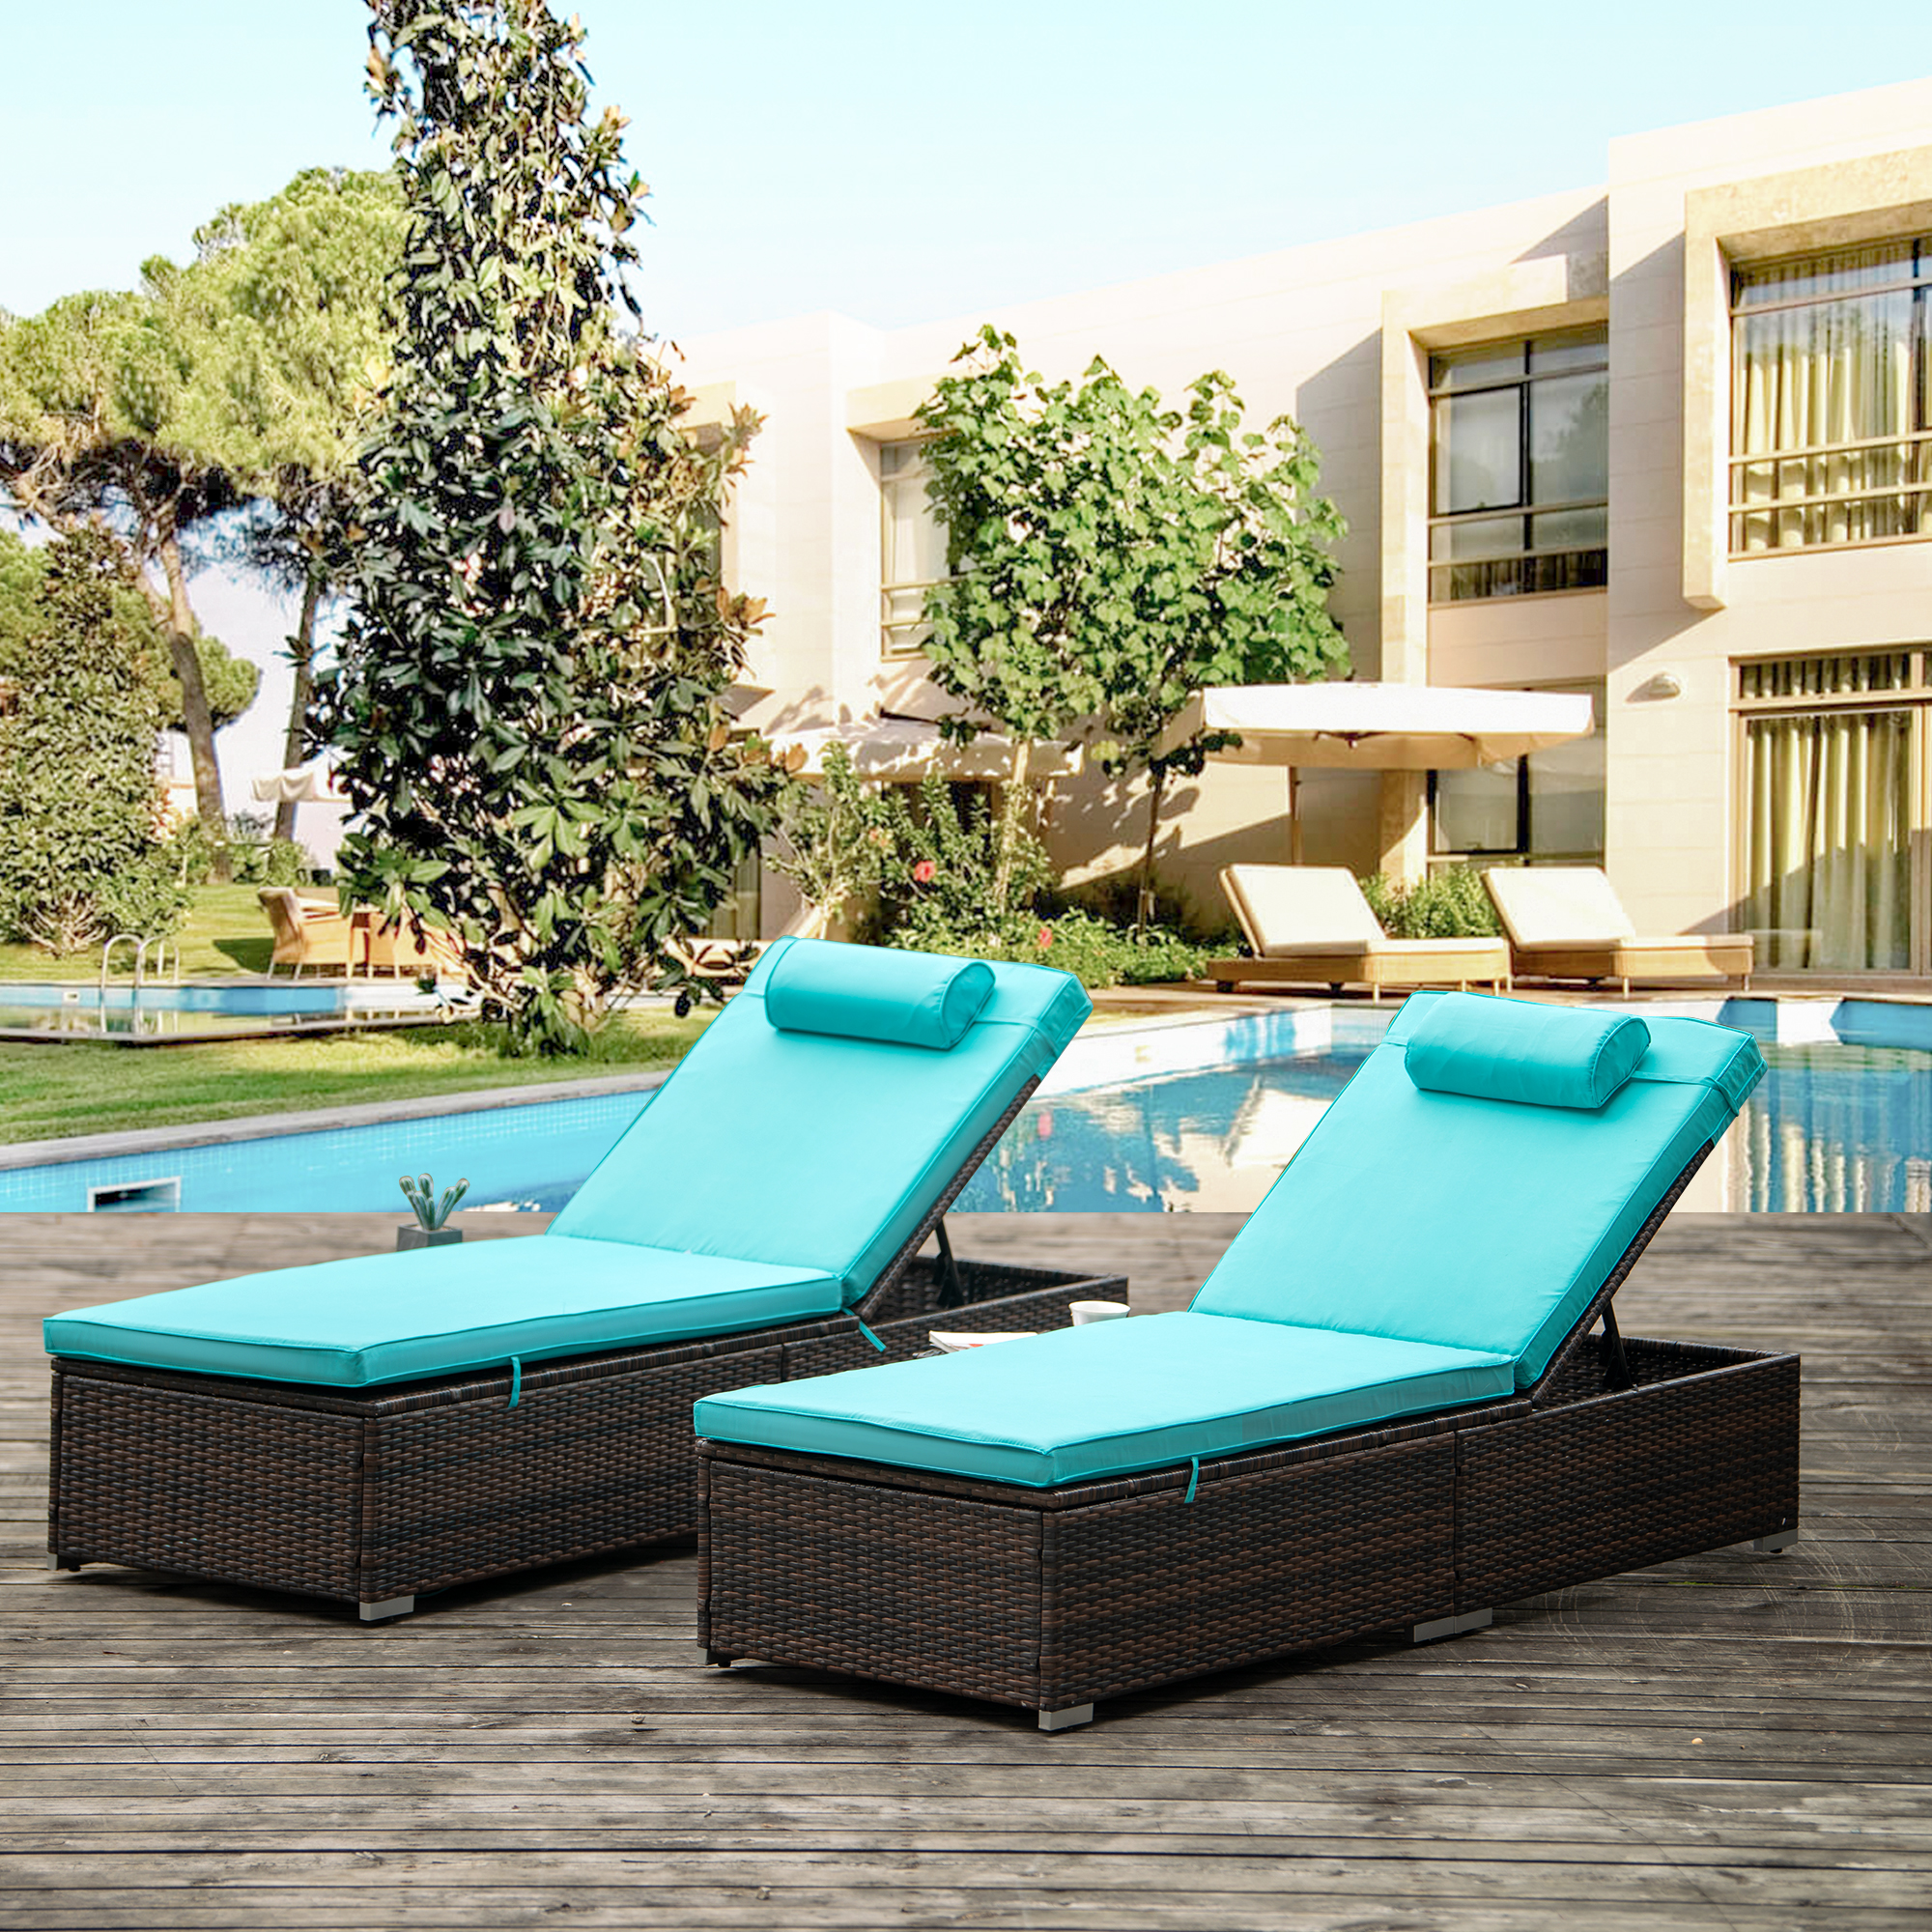 2 Piece Patio Chaise Lounge Furniture Set with Side Table, 5-Position Adjustable Cushioned Rattan Chaise Lounge with Head Pillow, PE Rattan Backrest Lounge Chairs Set for Pool Balcony Deck Yard, B68 - image 2 of 11